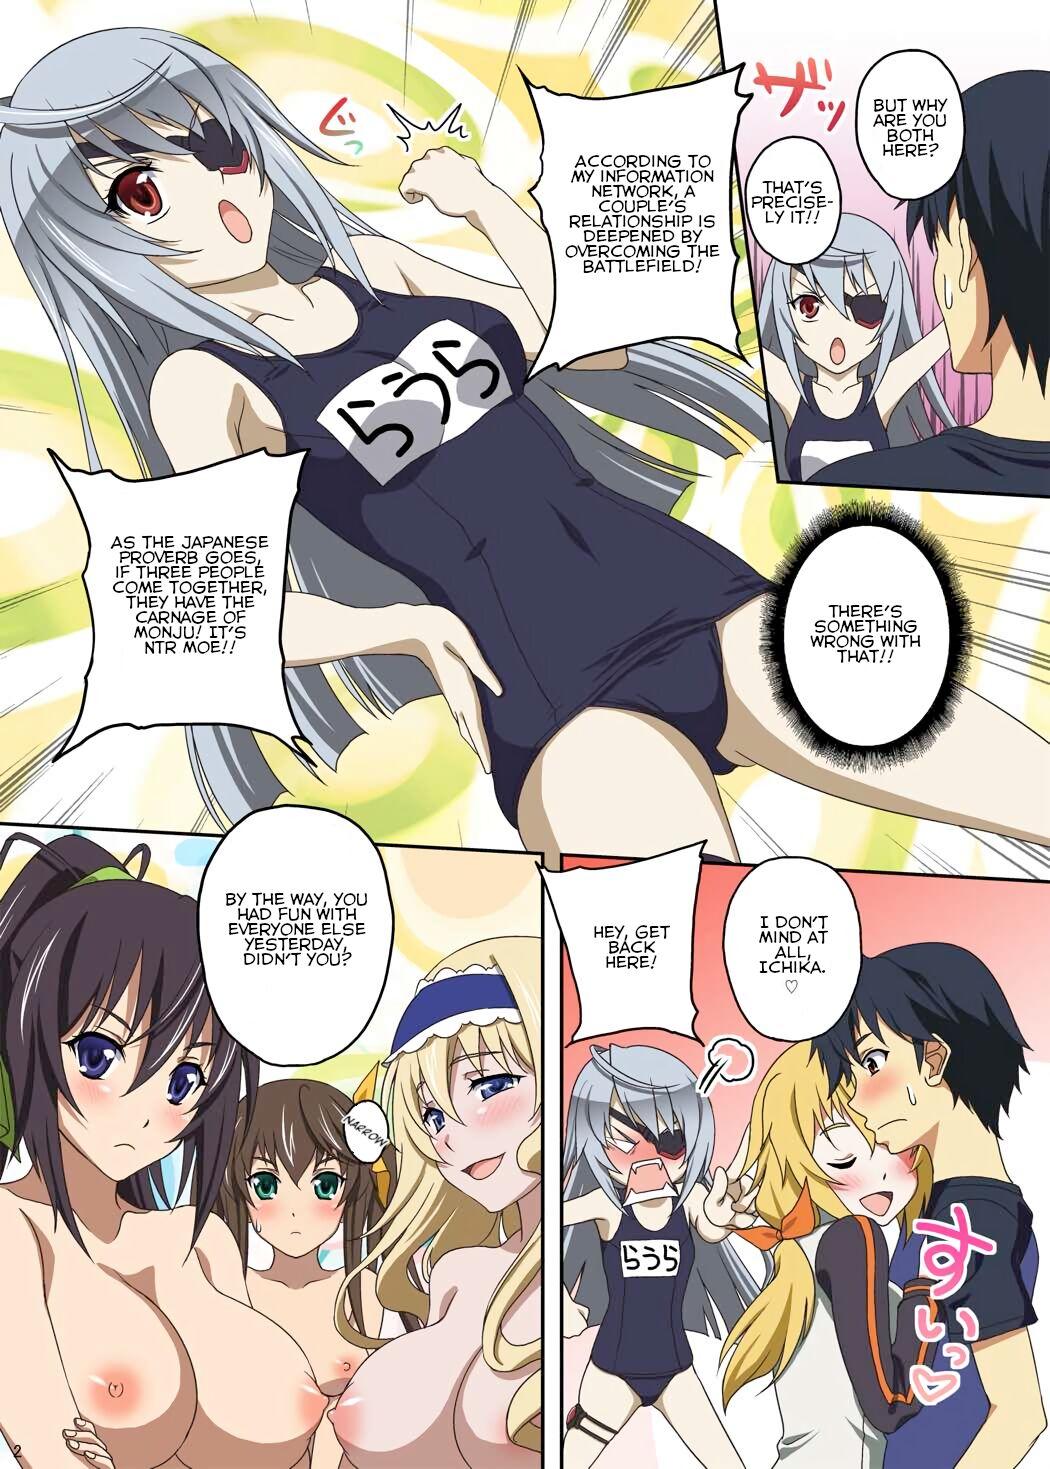 Euro Porn IS no Hon - Infinite stratos Hot Naked Women - Page 3